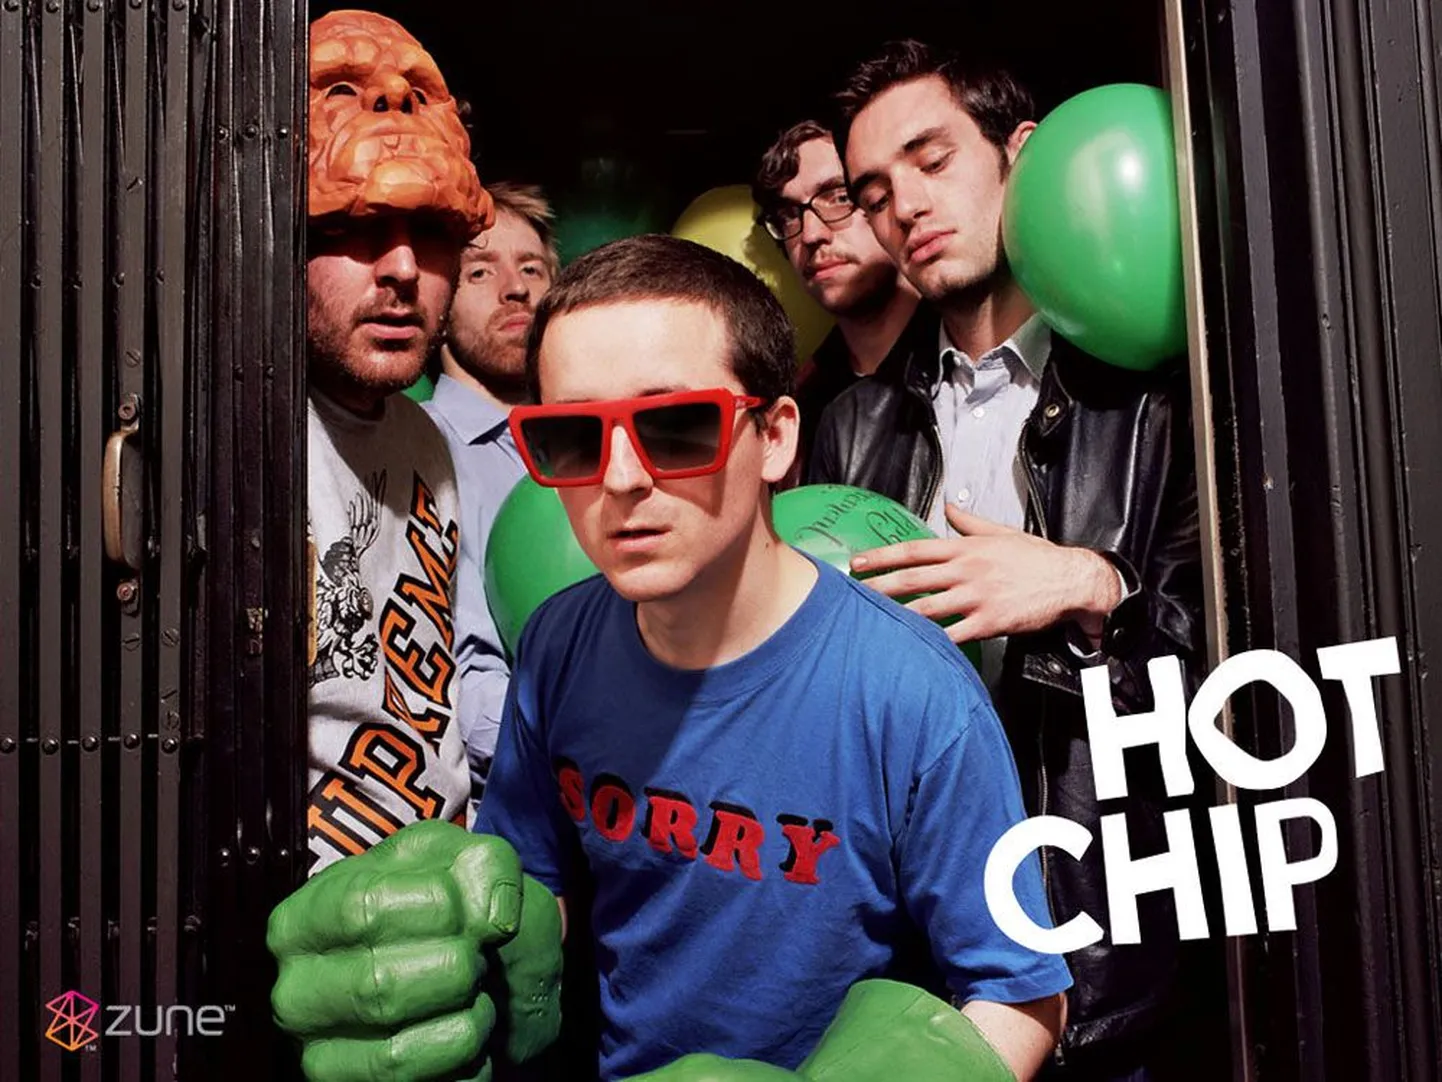 Hot Chip
One Life Stand (Parlophone)